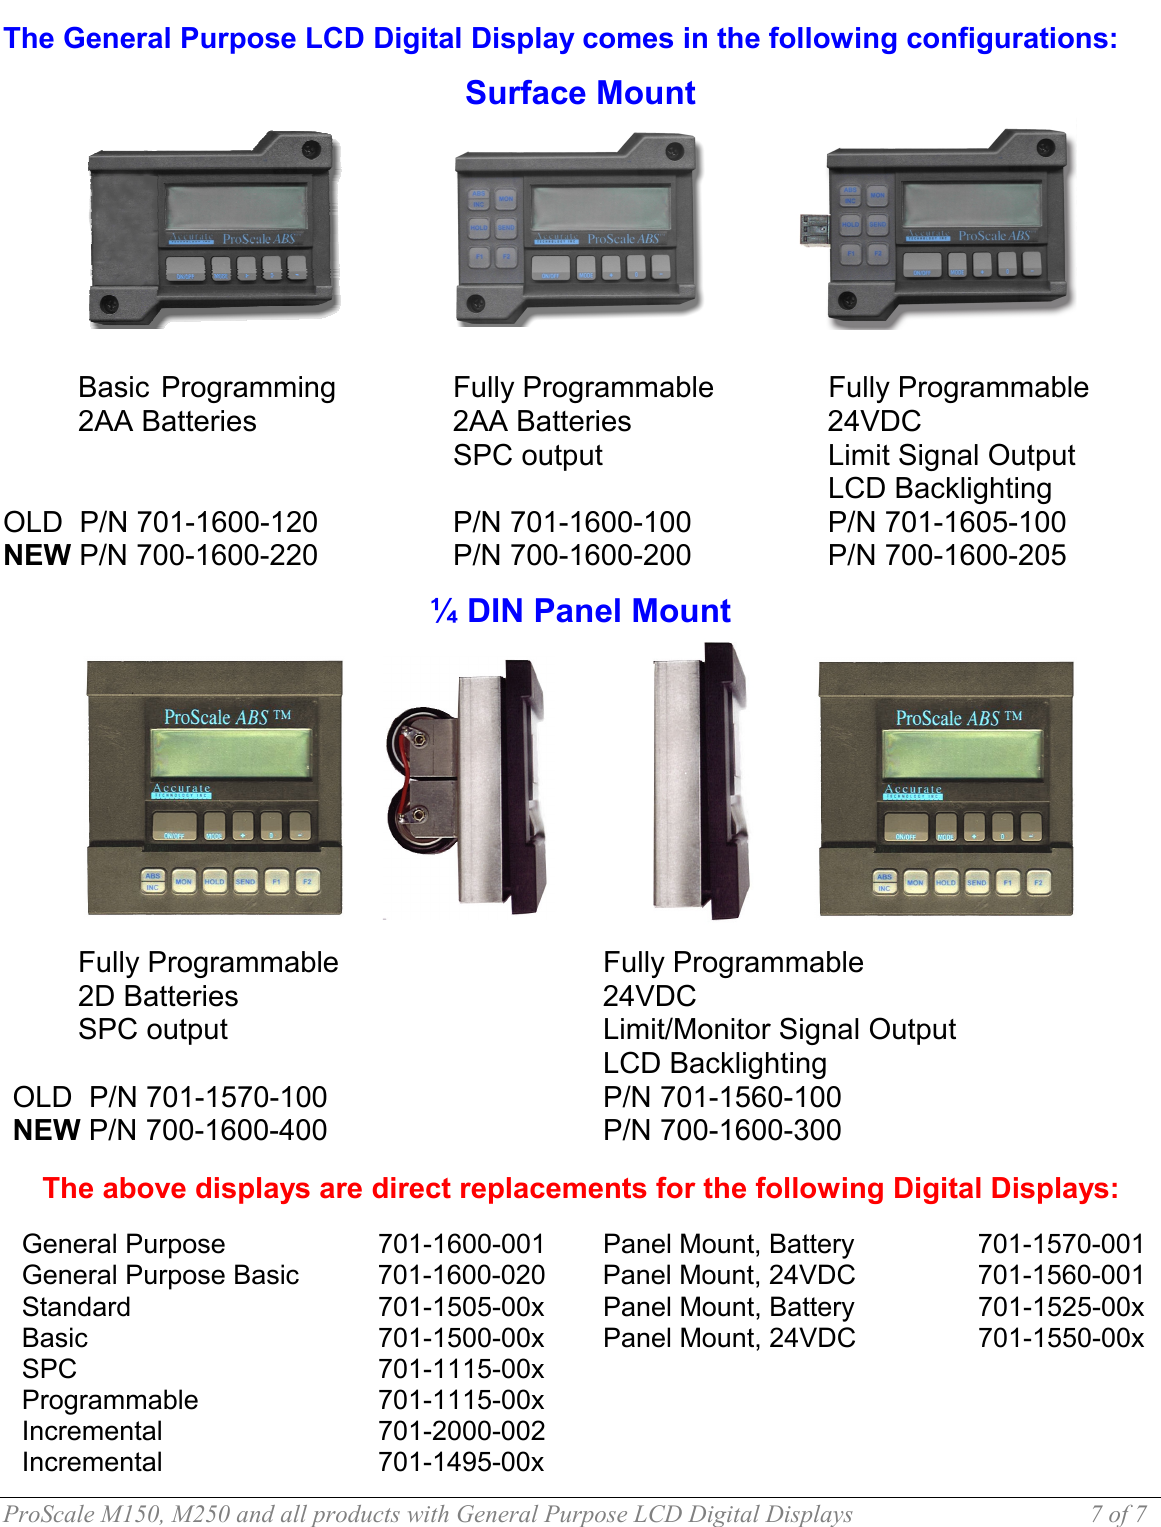  ProScale M150, M250 and all products with General Purpose LCD Digital Displays  7 of 7 The General Purpose LCD Digital Display comes in the following configurations:  Surface Mount          Basic  Programming    Fully Programmable    Fully Programmable 2AA Batteries    2AA Batteries   24VDC      SPC output    Limit Signal Output           LCD Backlighting OLD  P/N 701-1600-120   P/N 701-1600-100    P/N 701-1605-100  NEW P/N 700-1600-220   P/N 700-1600-200    P/N 700-1600-205   ¼ DIN Panel Mount              Fully Programmable    Fully Programmable 2D Batteries     24VDC SPC output      Limit/Monitor Signal Output        LCD Backlighting OLD  P/N 701-1570-100    P/N 701-1560-100      NEW P/N 700-1600-400    P/N 700-1600-300       The above displays are direct replacements for the following Digital Displays:  General Purpose     701-1600-001  Panel Mount, Battery    701-1570-001 General Purpose Basic   701-1600-020  Panel Mount, 24VDC    701-1560-001 Standard    701-1505-00x Panel Mount, Battery   701-1525-00x Basic    701-1500-00x Panel Mount, 24VDC   701-1550-00x SPC     701-1115-00x Programmable   701-1115-00x Incremental   701-2000-002    Incremental    701-1495-00x    